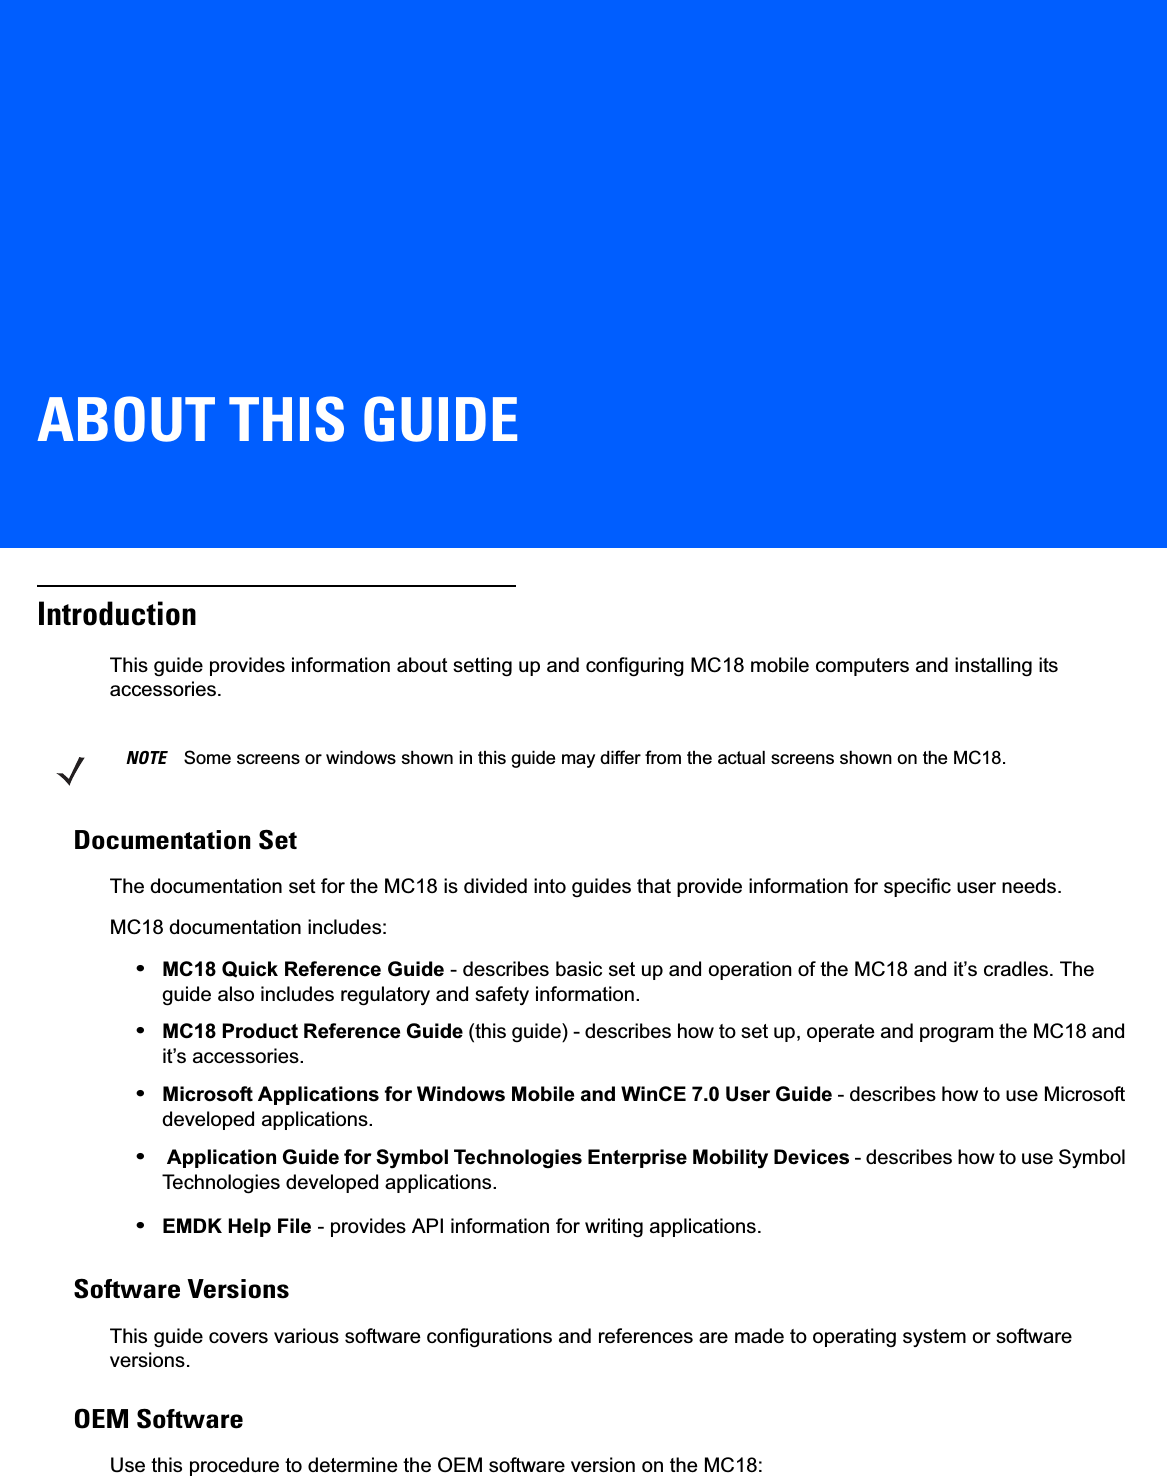 ABOUT THIS GUIDEIntroductionThis guide provides information about setting up and configuring MC18 mobile computers and installing its accessories.Documentation SetThe documentation set for the MC18 is divided into guides that provide information for specific user needs.MC18 documentation includes:•MC18 Quick Reference Guide - describes basic set up and operation of the MC18 and it’s cradles. The guide also includes regulatory and safety information.•MC18 Product Reference Guide (this guide) - describes how to set up, operate and program the MC18 and it’s accessories.•Microsoft Applications for Windows Mobile and WinCE 7.0 User Guide - describes how to use Microsoft developed applications.• Application Guide for Symbol Technologies Enterprise Mobility Devices - describes how to use Symbol Technologies developed applications.•EMDK Help File - provides API information for writing applications.Software VersionsThis guide covers various software configurations and references are made to operating system or software versions.OEM SoftwareUse this procedure to determine the OEM software version on the MC18:NOTE Some screens or windows shown in this guide may differ from the actual screens shown on the MC18.